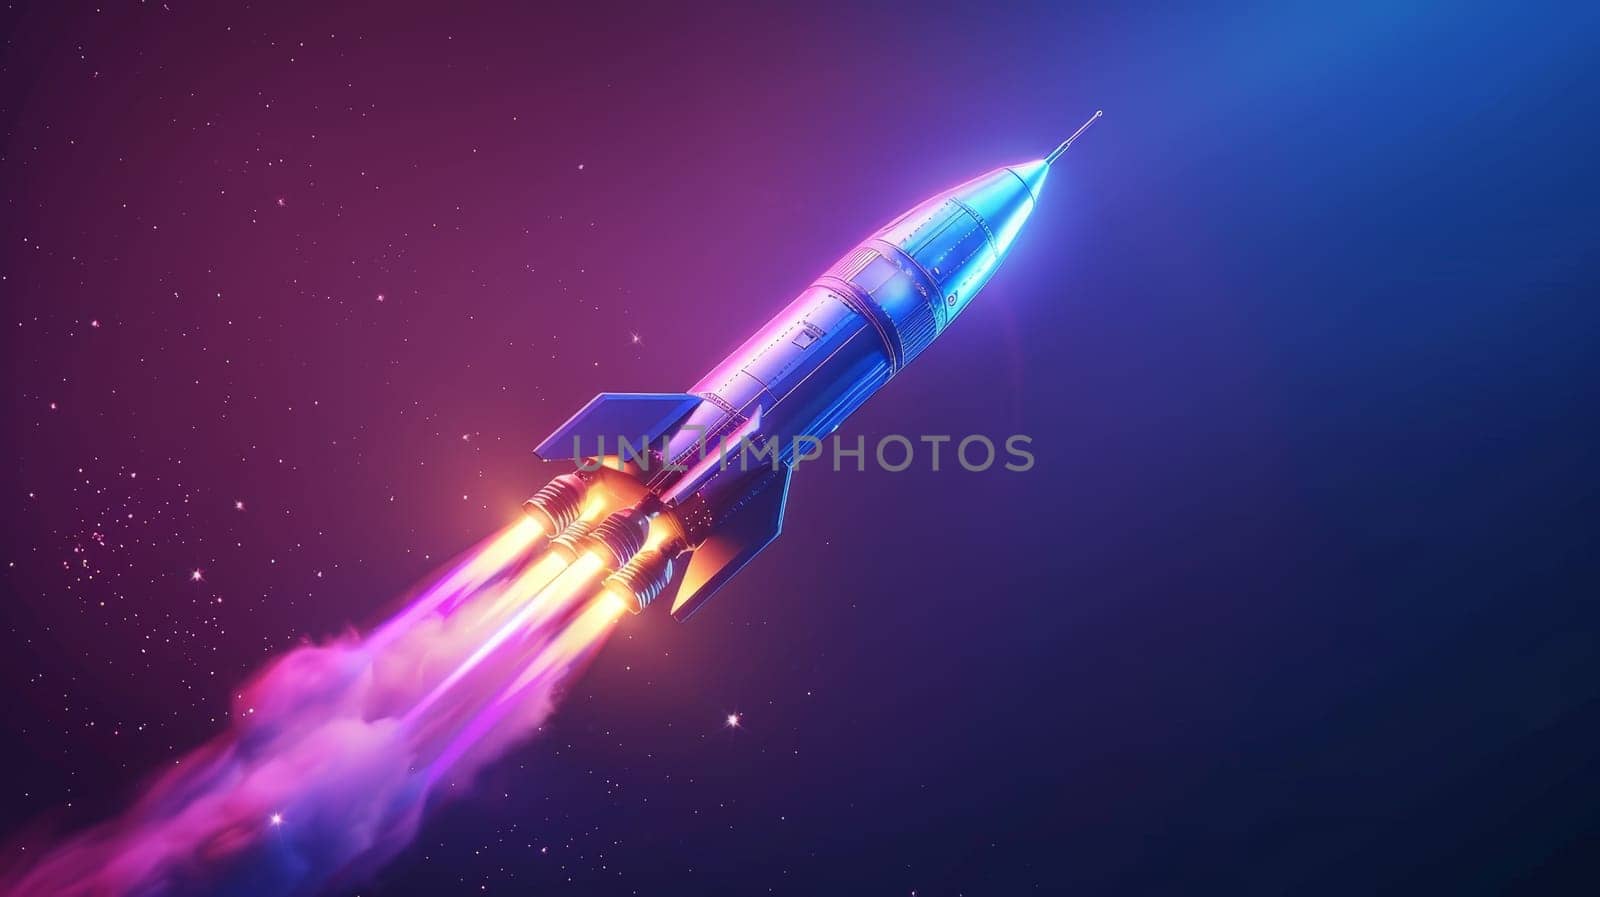 A space rocket taking off, Rocket ship launch, Startup concept with copy space by nijieimu